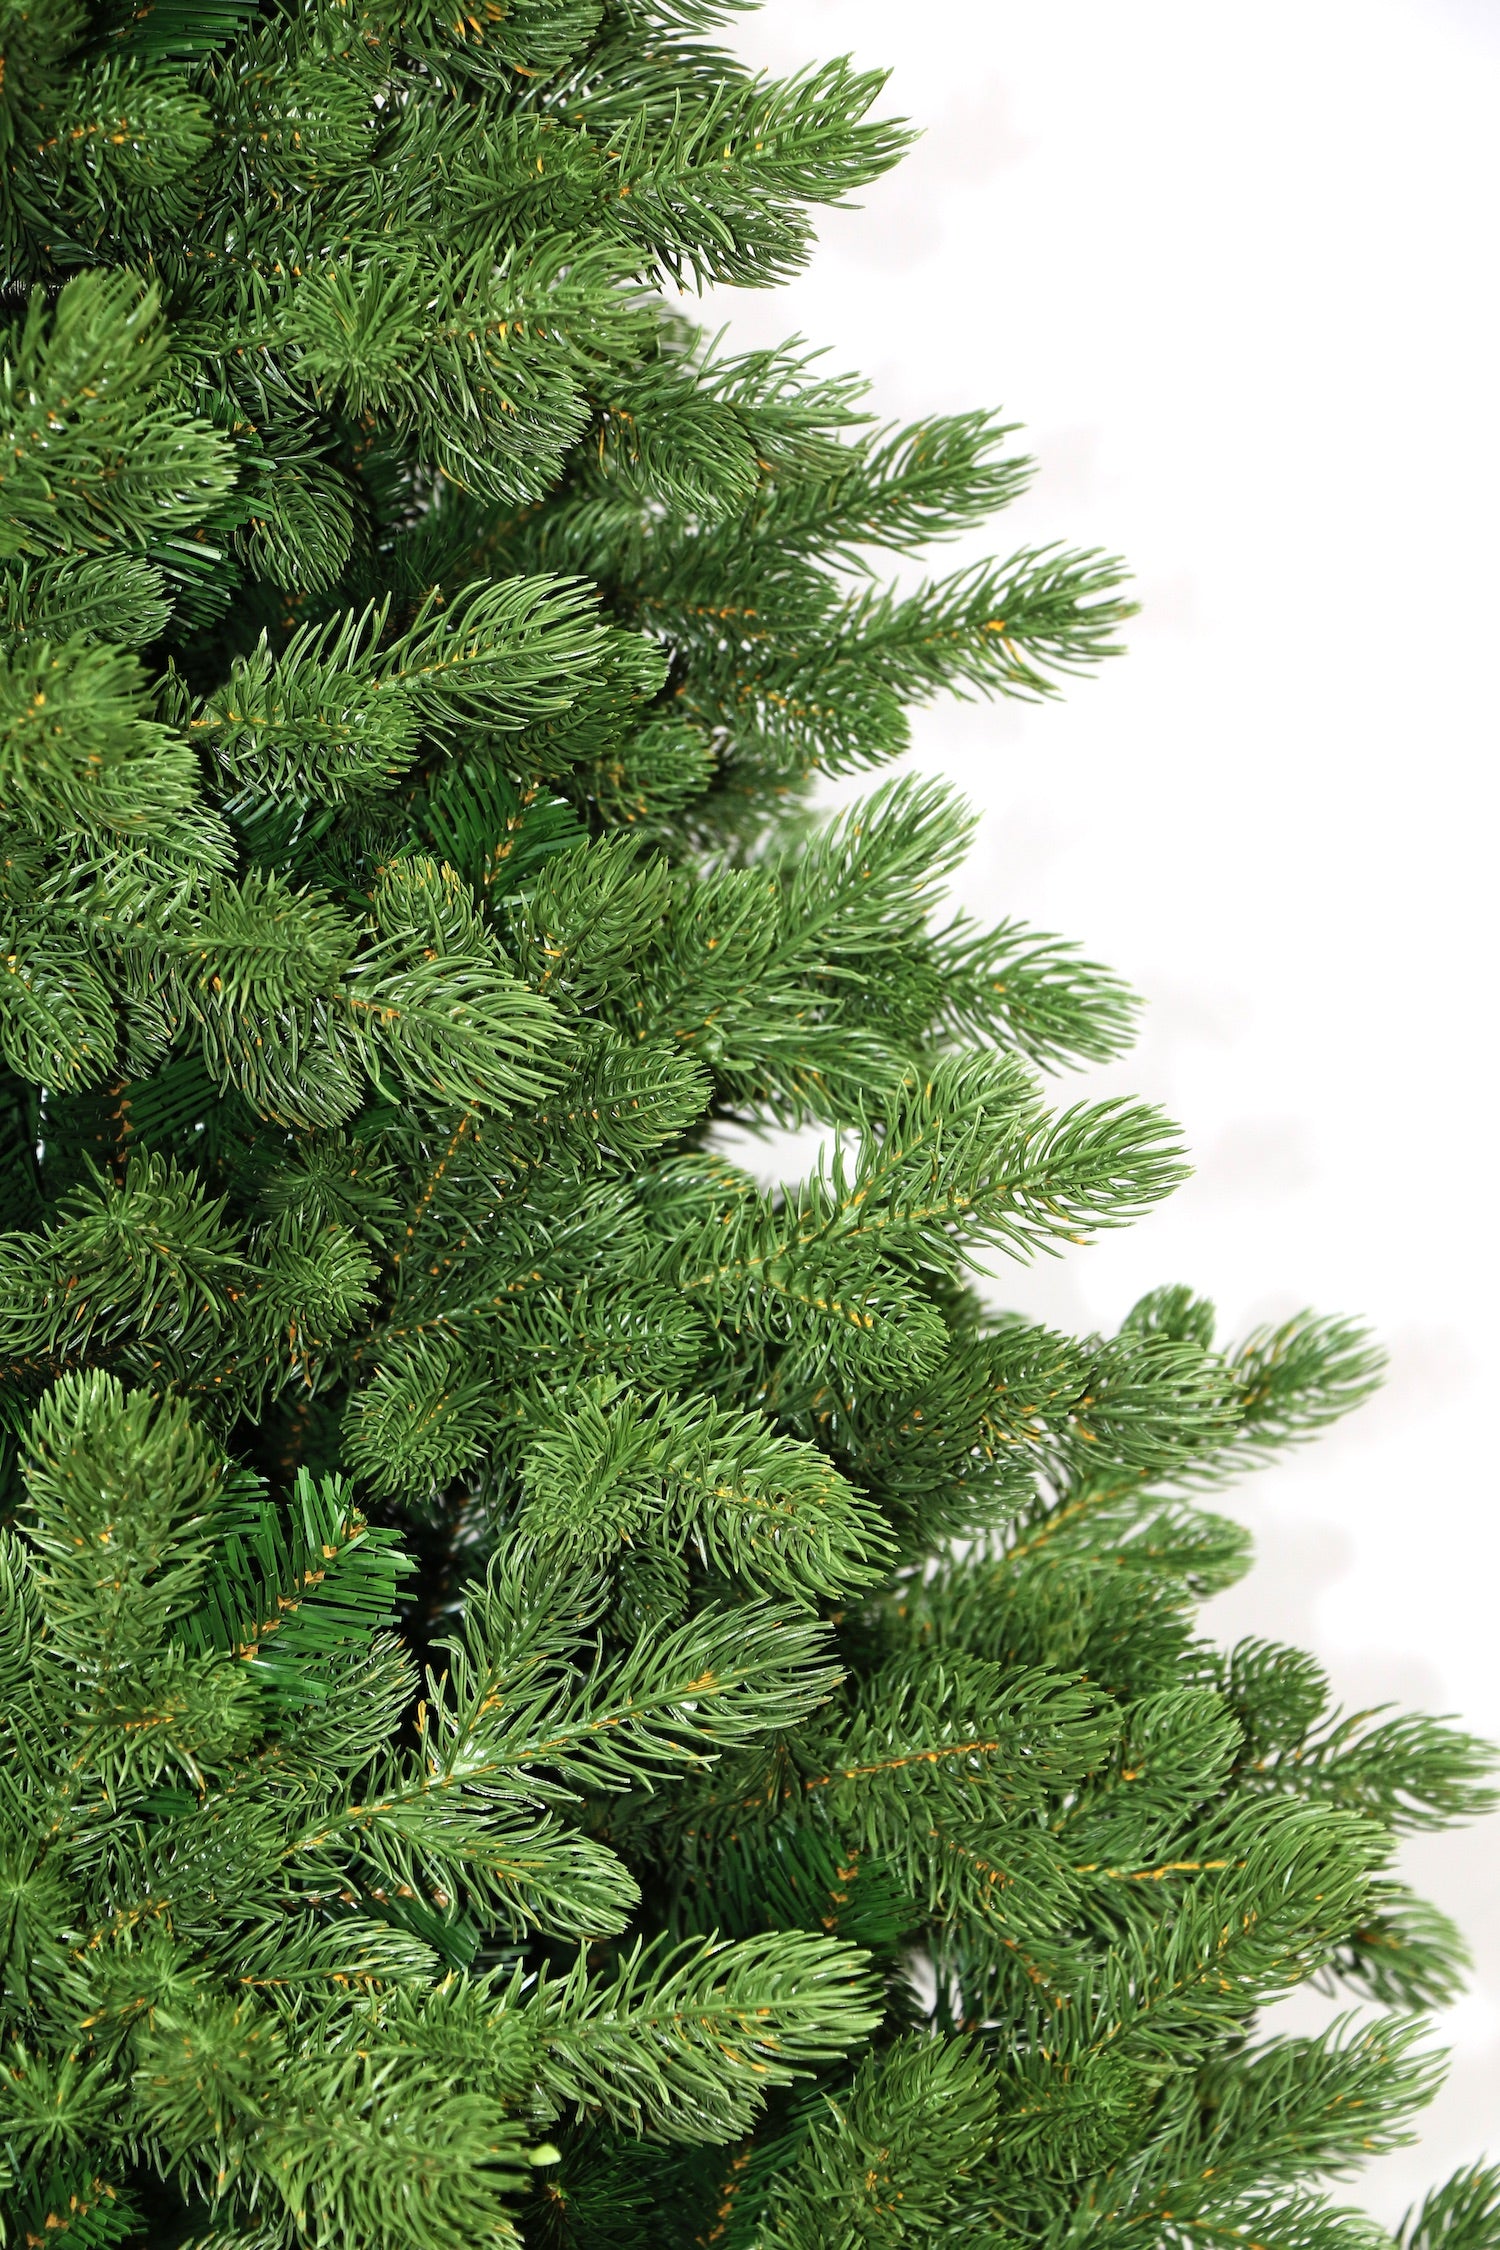 King of Christmas 7.5' Cypress Spruce Quick-Shape Artificial Christmas Tree Unlit